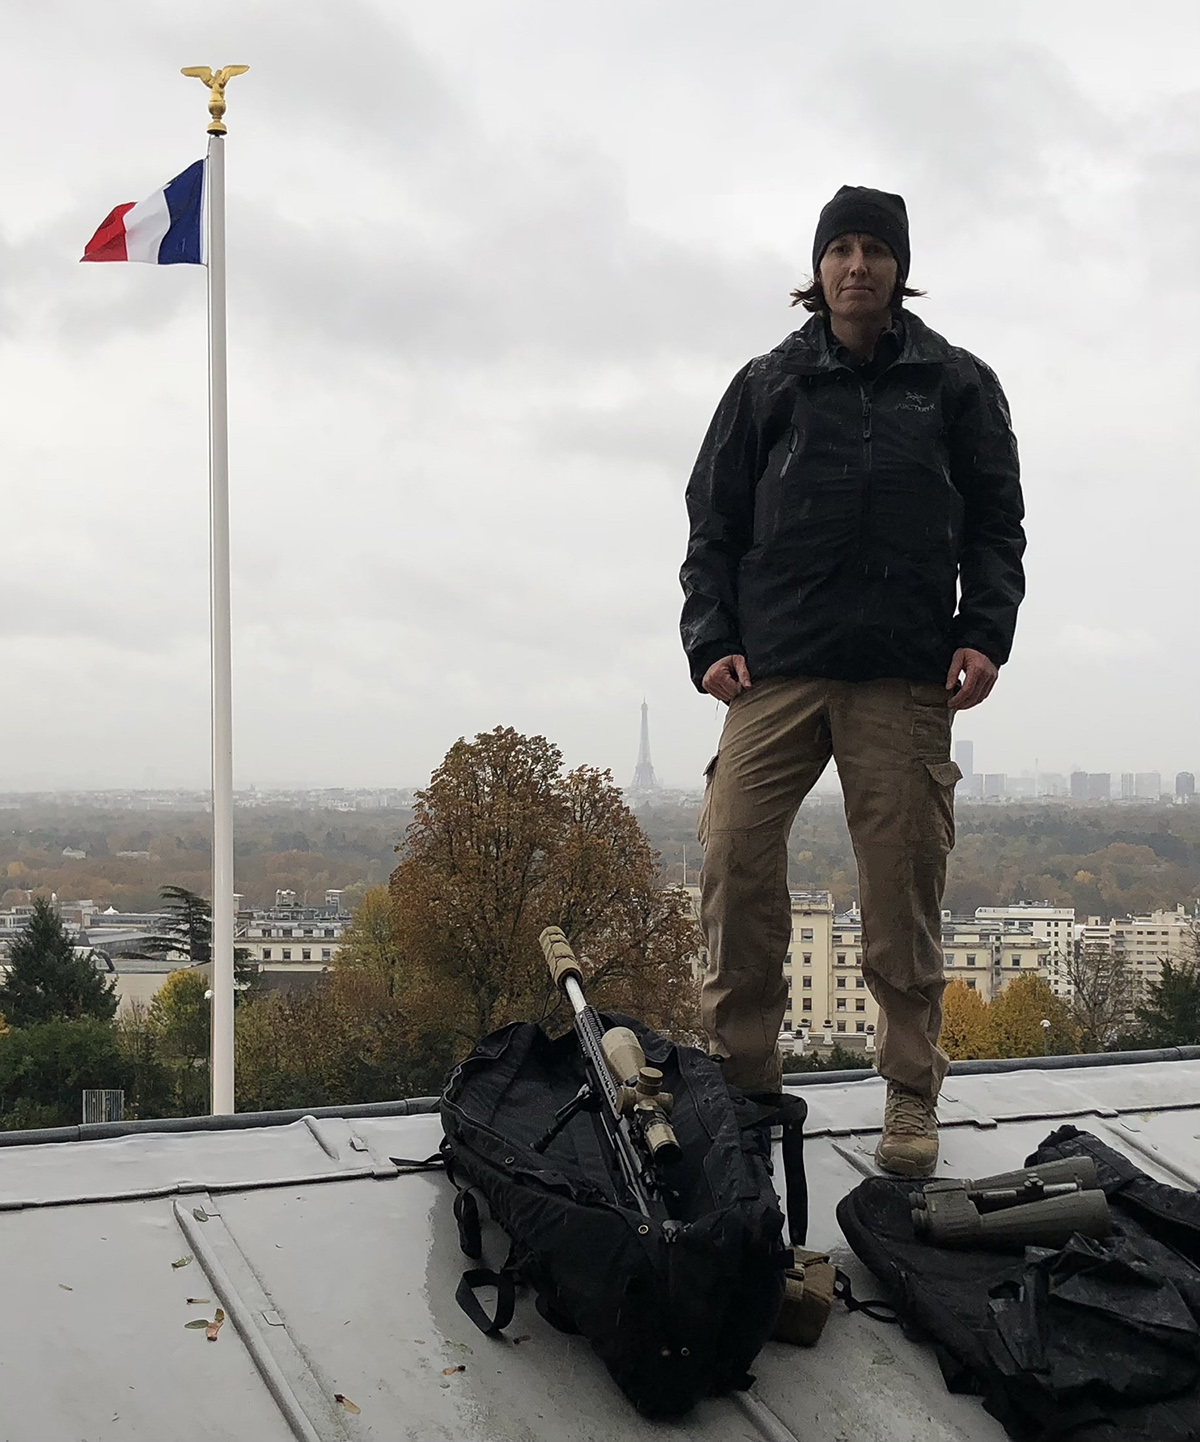 Officer-Technician Kim Sayles on the rooftop of a building in Paris with counter sniper gear. 